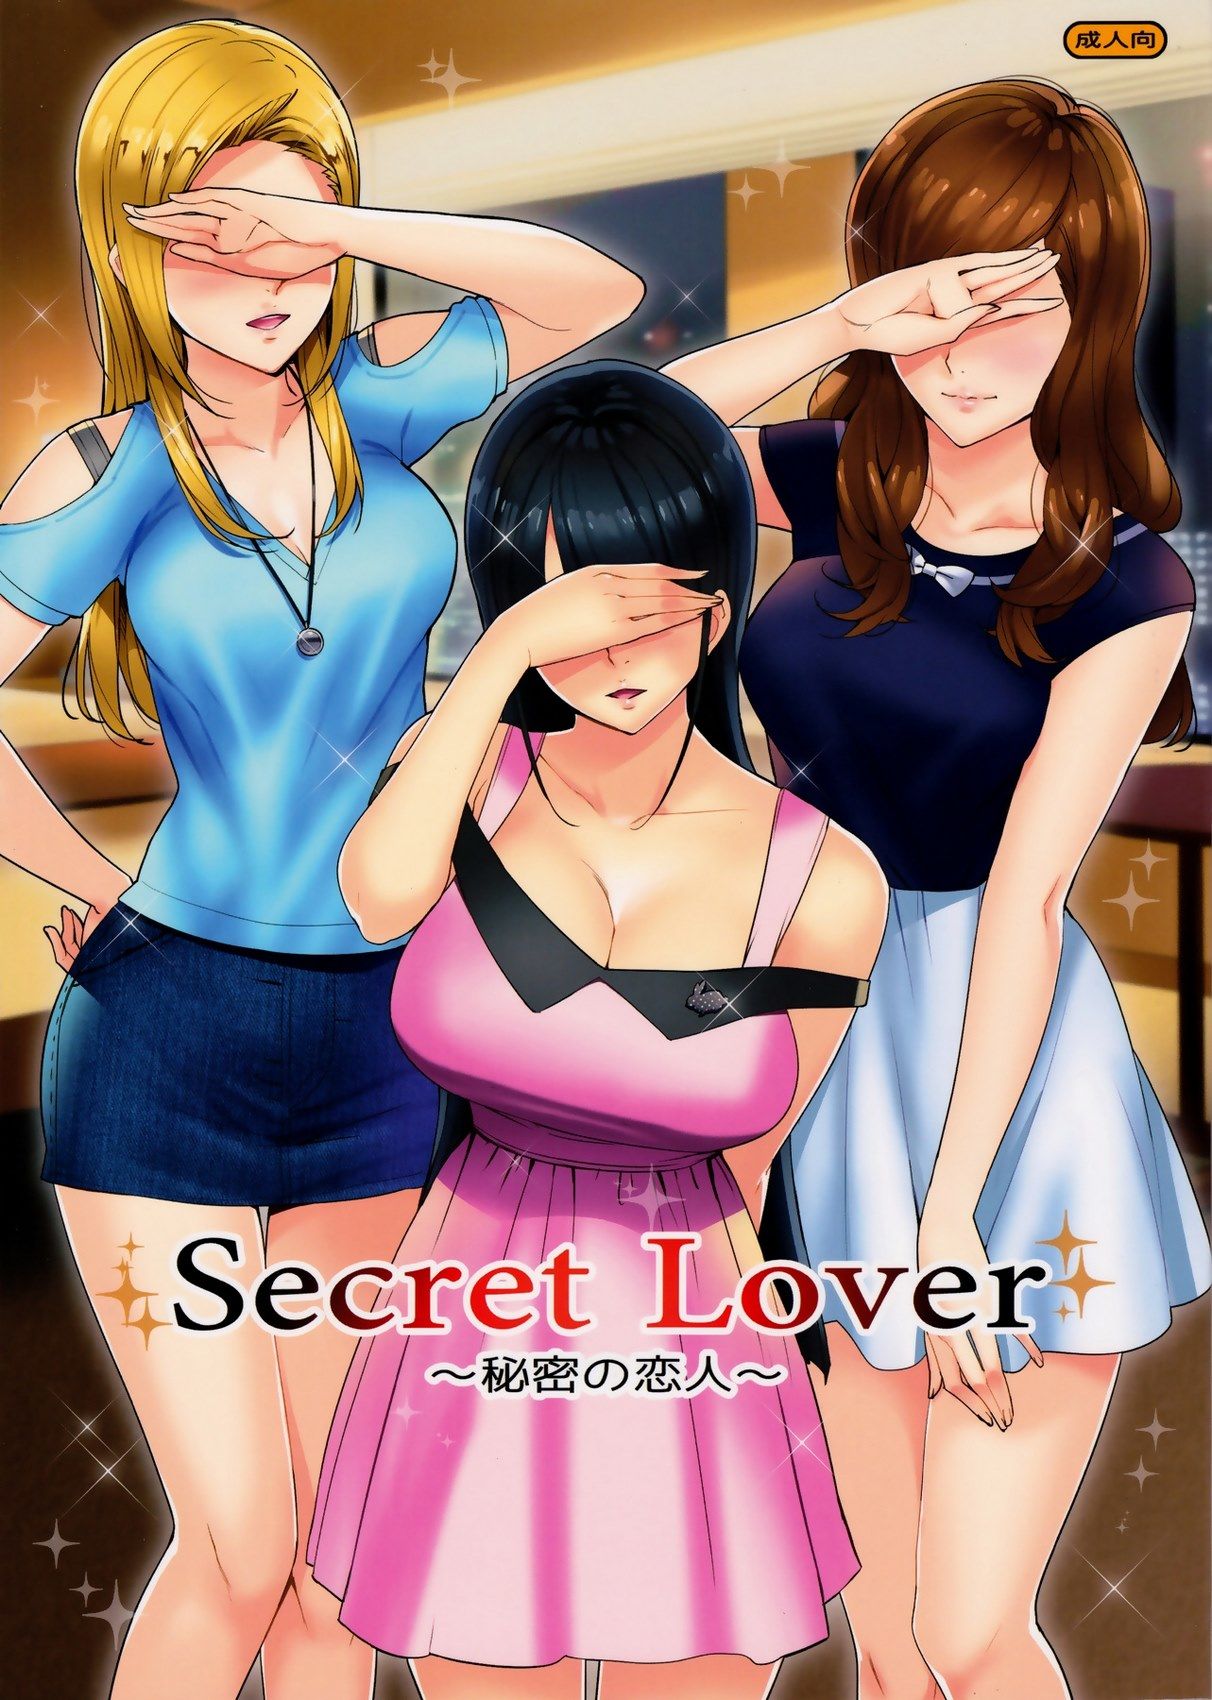 Secret Lover by Takuji and Number2 page 1